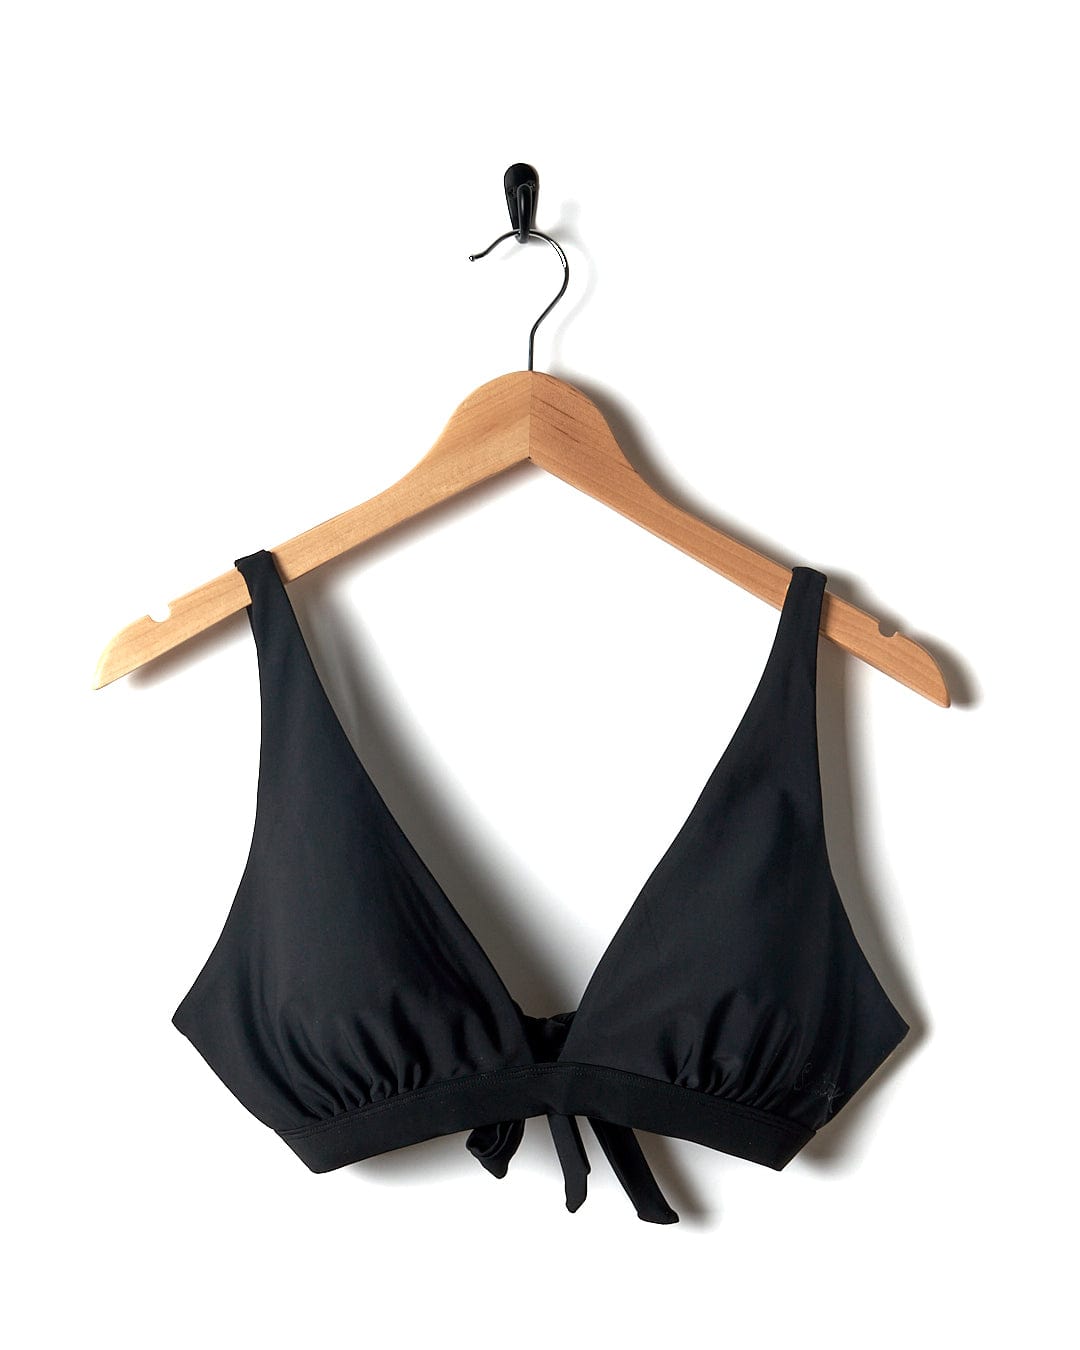 A durable Rosie Women's Bikini Top in black with adjustable straps, hanging on a hanger. Brand: Saltrock.